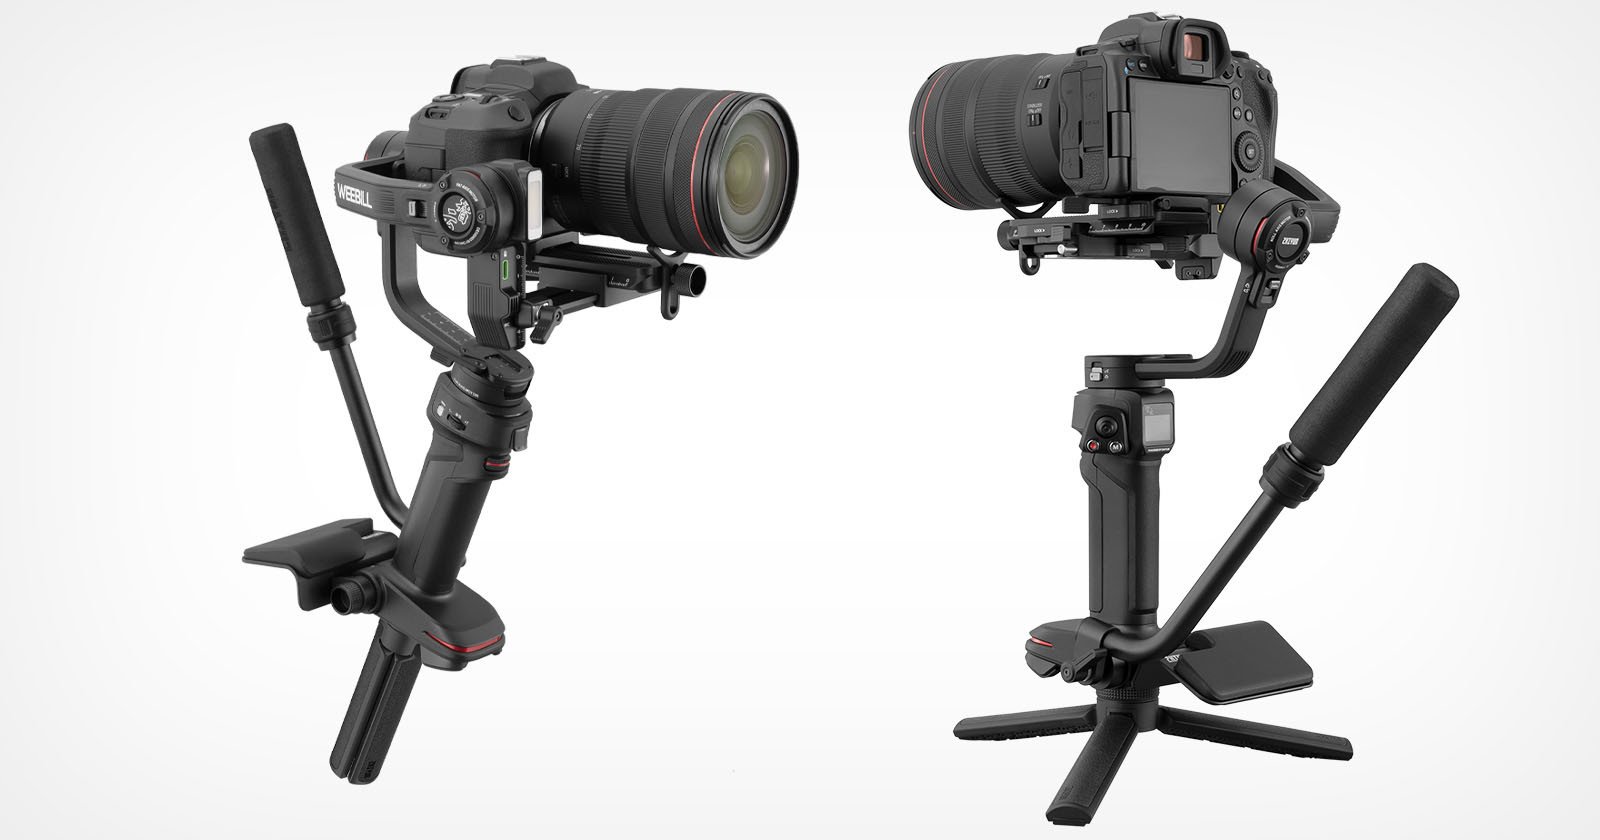 Zhiyuns Weebil 3 Camera Gimbal has a Built-in Mic and Super-Bright LED